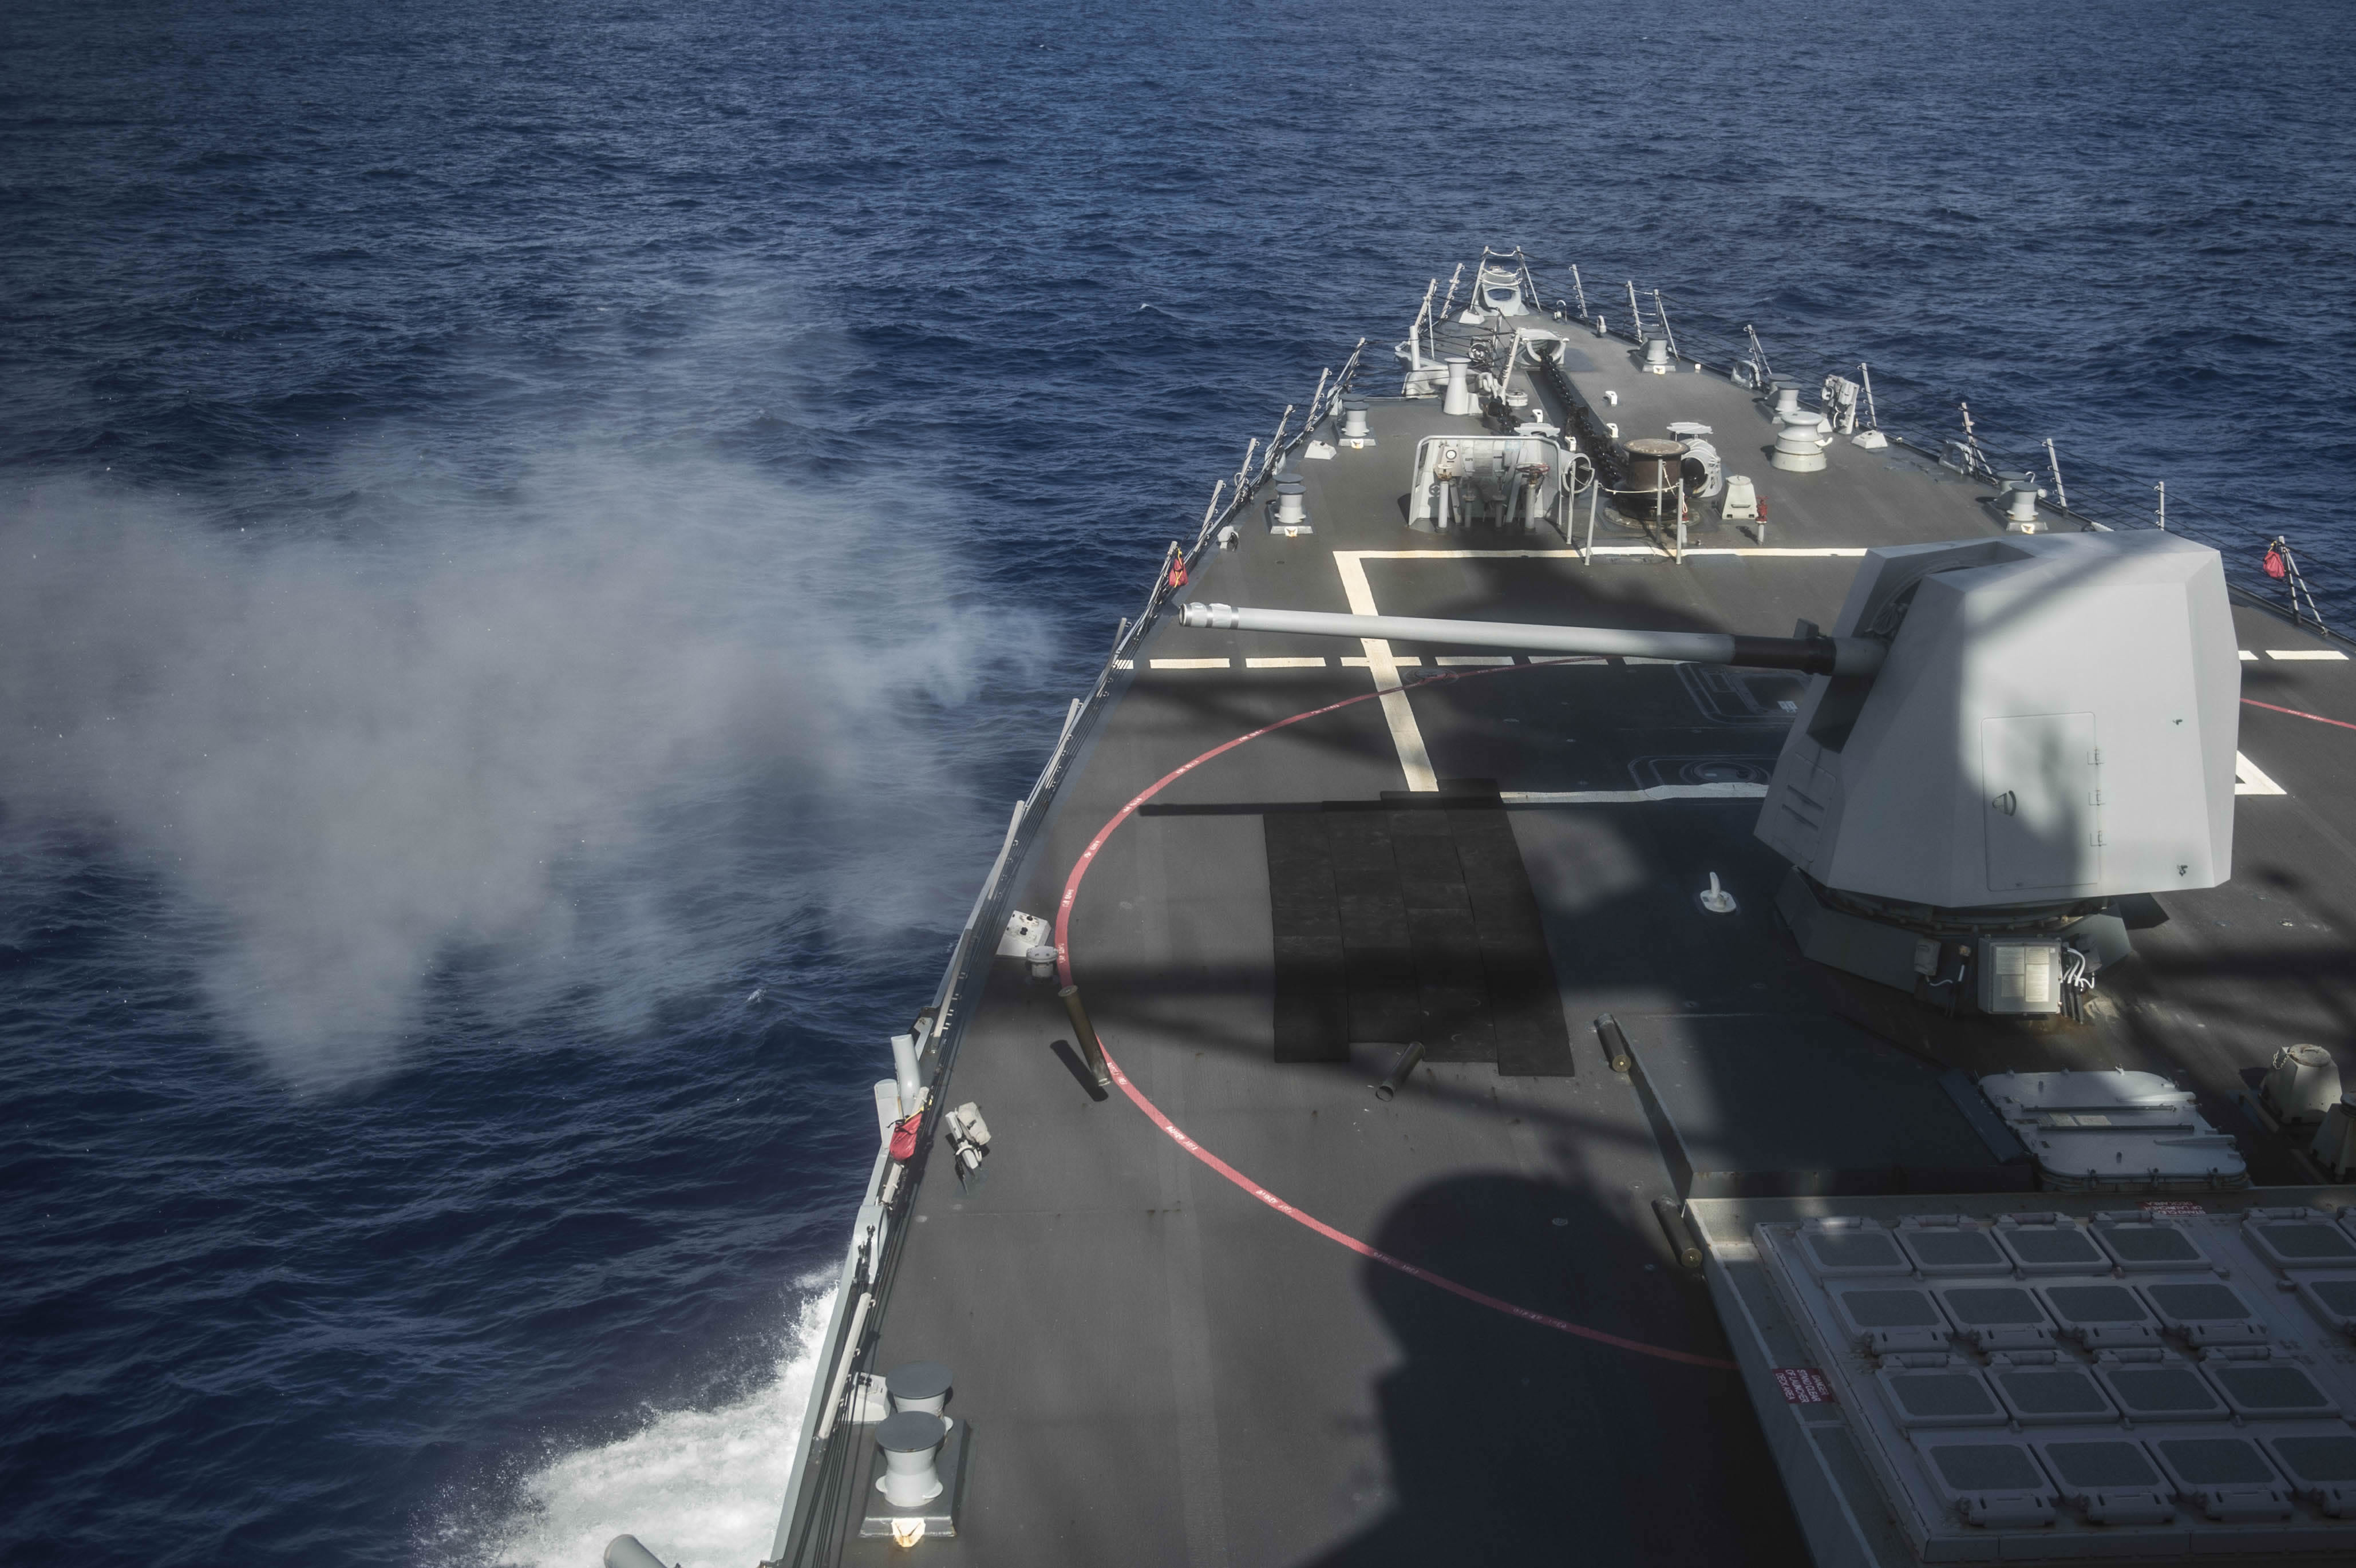 The Excalibur munition's naval 5-inch variant will offer long range precision fires to counter fast attack craft and to provide naval surface fire support.